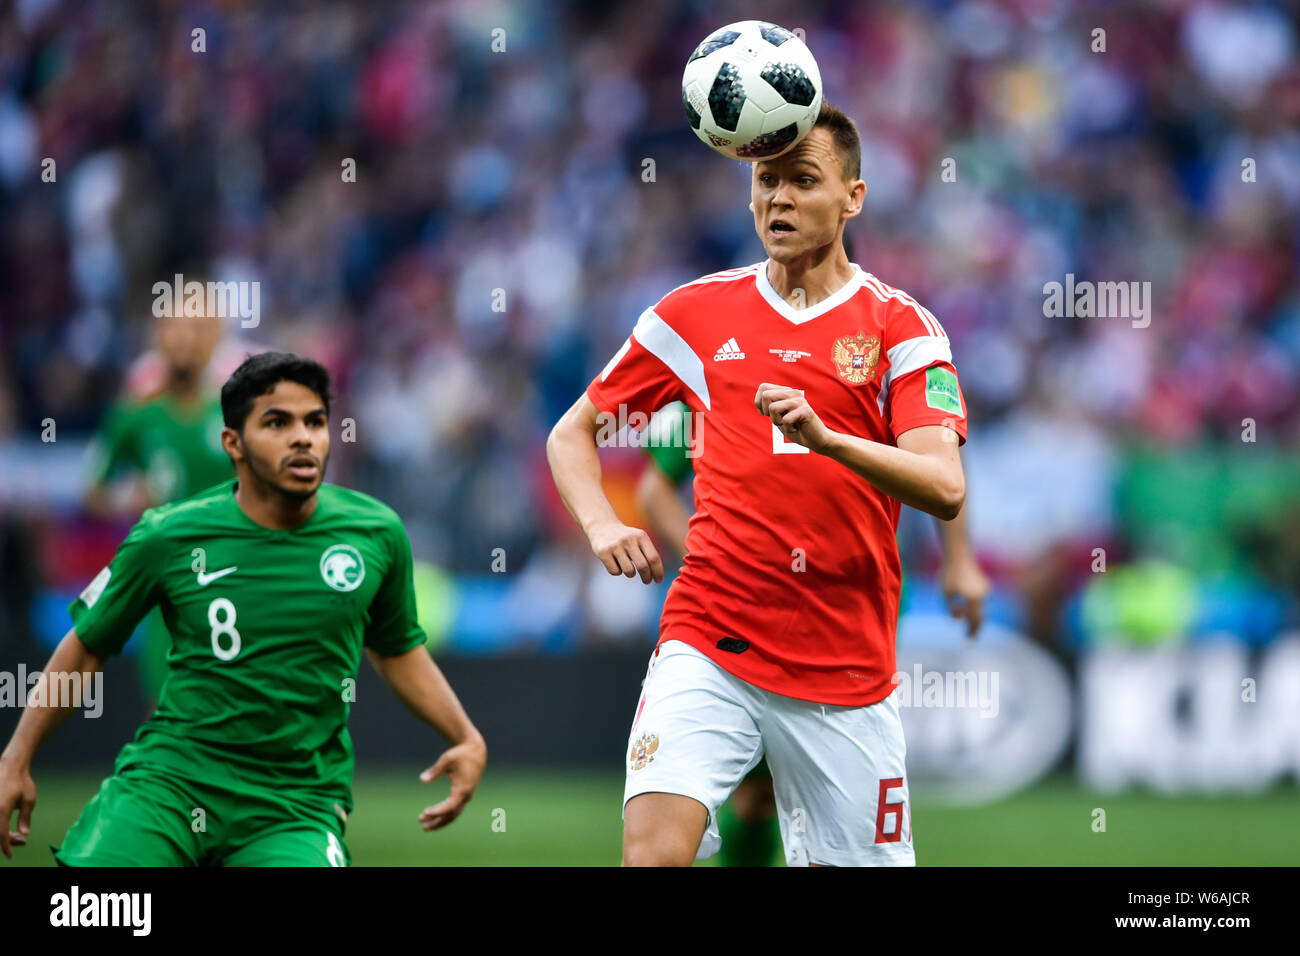 Denis Cheryshev of Russia, right, challenges Yahya Al-Shehri of Saudi Arabia in their Group A match during the 2018 FIFA World Cup in Moscow, Russia, Stock Photo